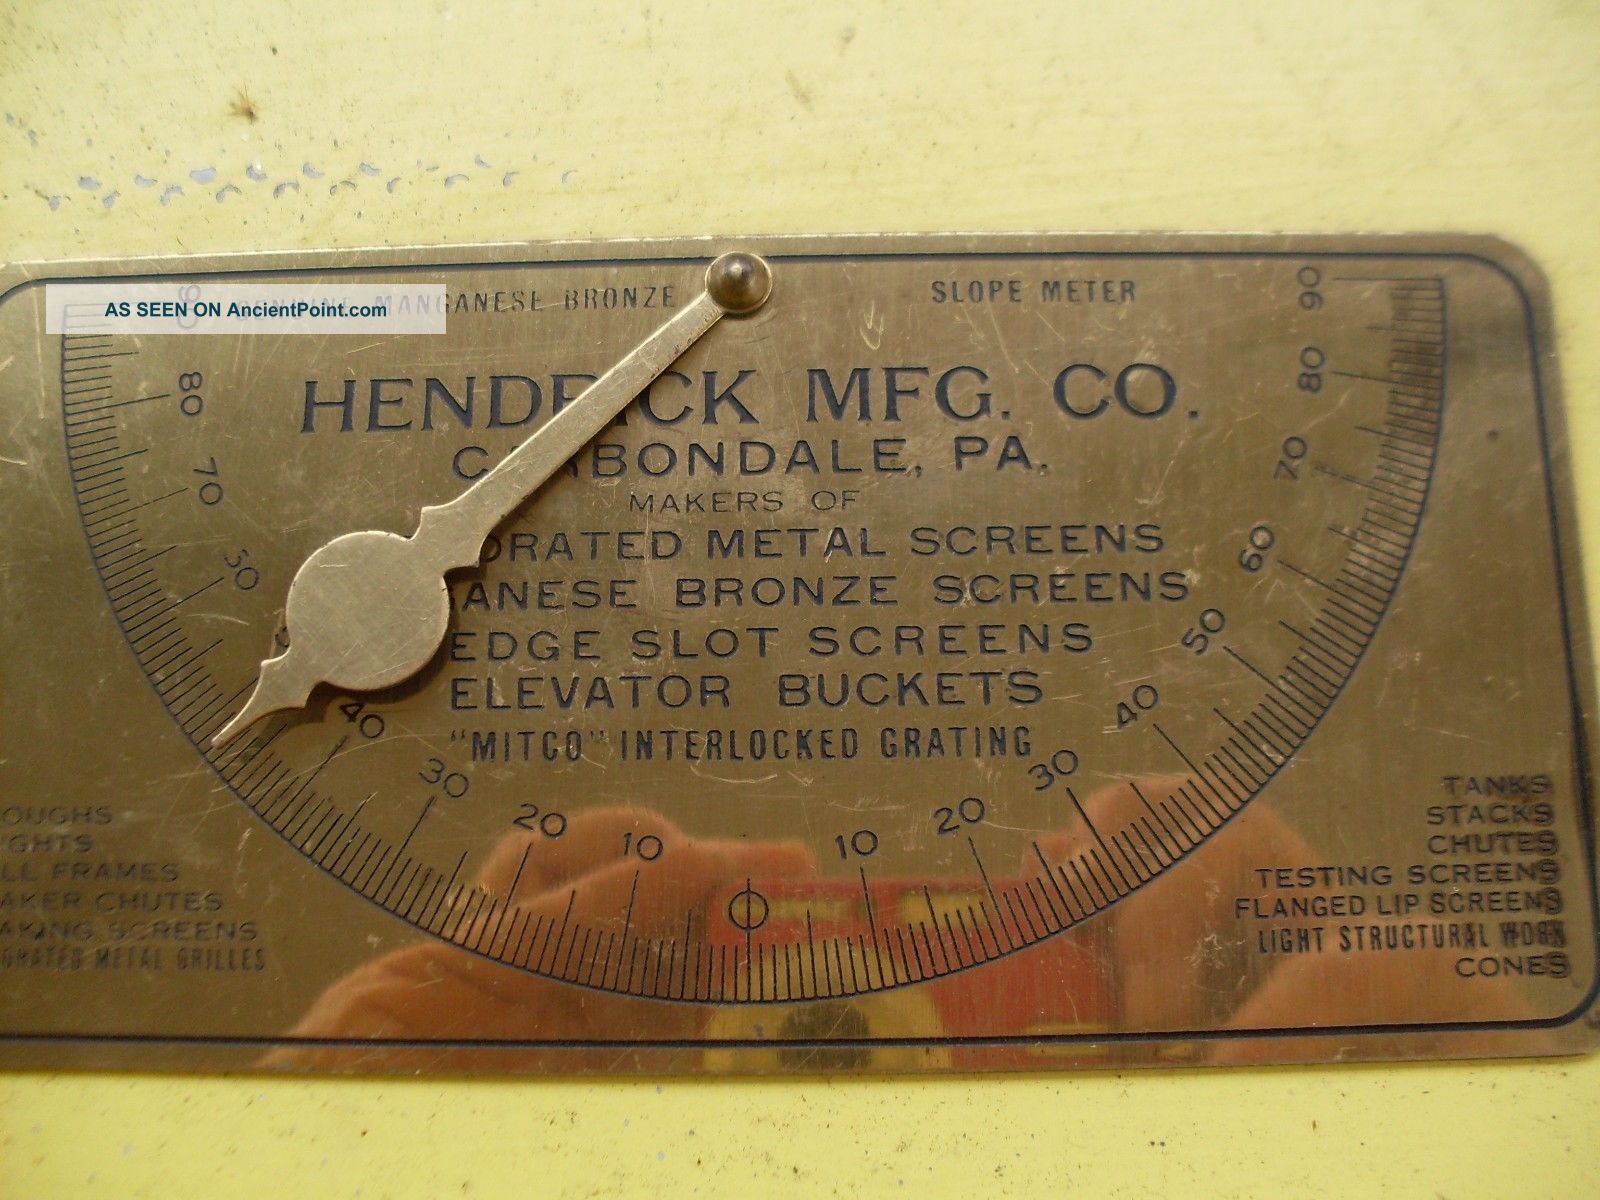 Antique Hendrick Mfg Carbondale Pa Brass Slope Meter Plate Plaque - Steampunk Other Mercantile Antiques photo